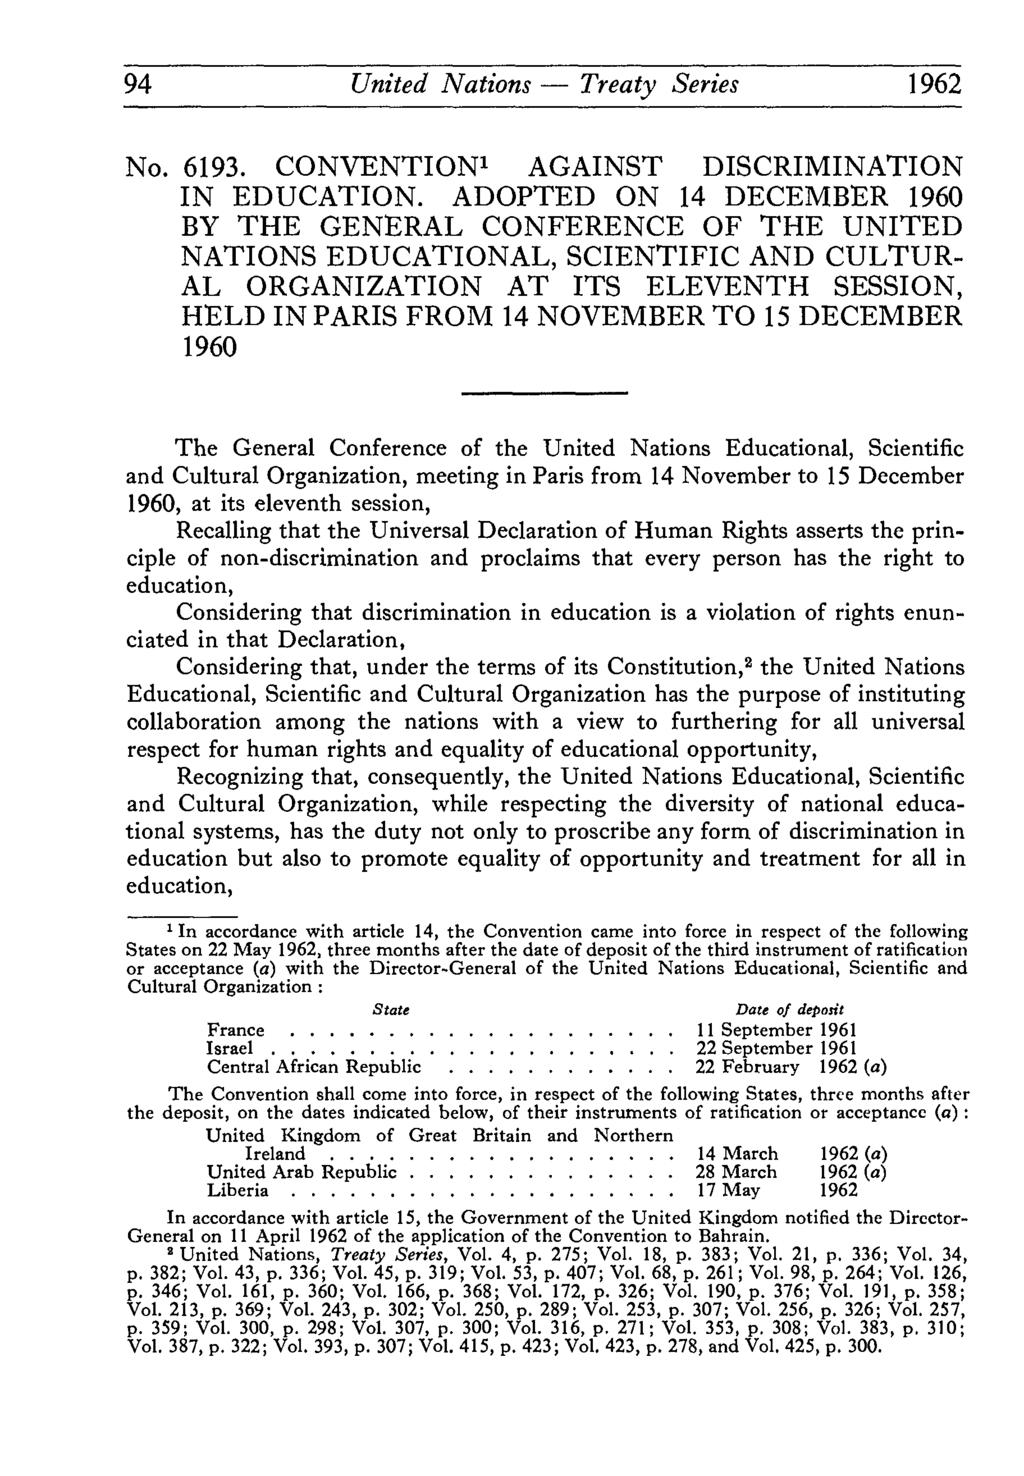 94 United Nations Treaty Series 1962. CONVENTION1 AGAINST DISCRIMINATION IN EDUCATION.